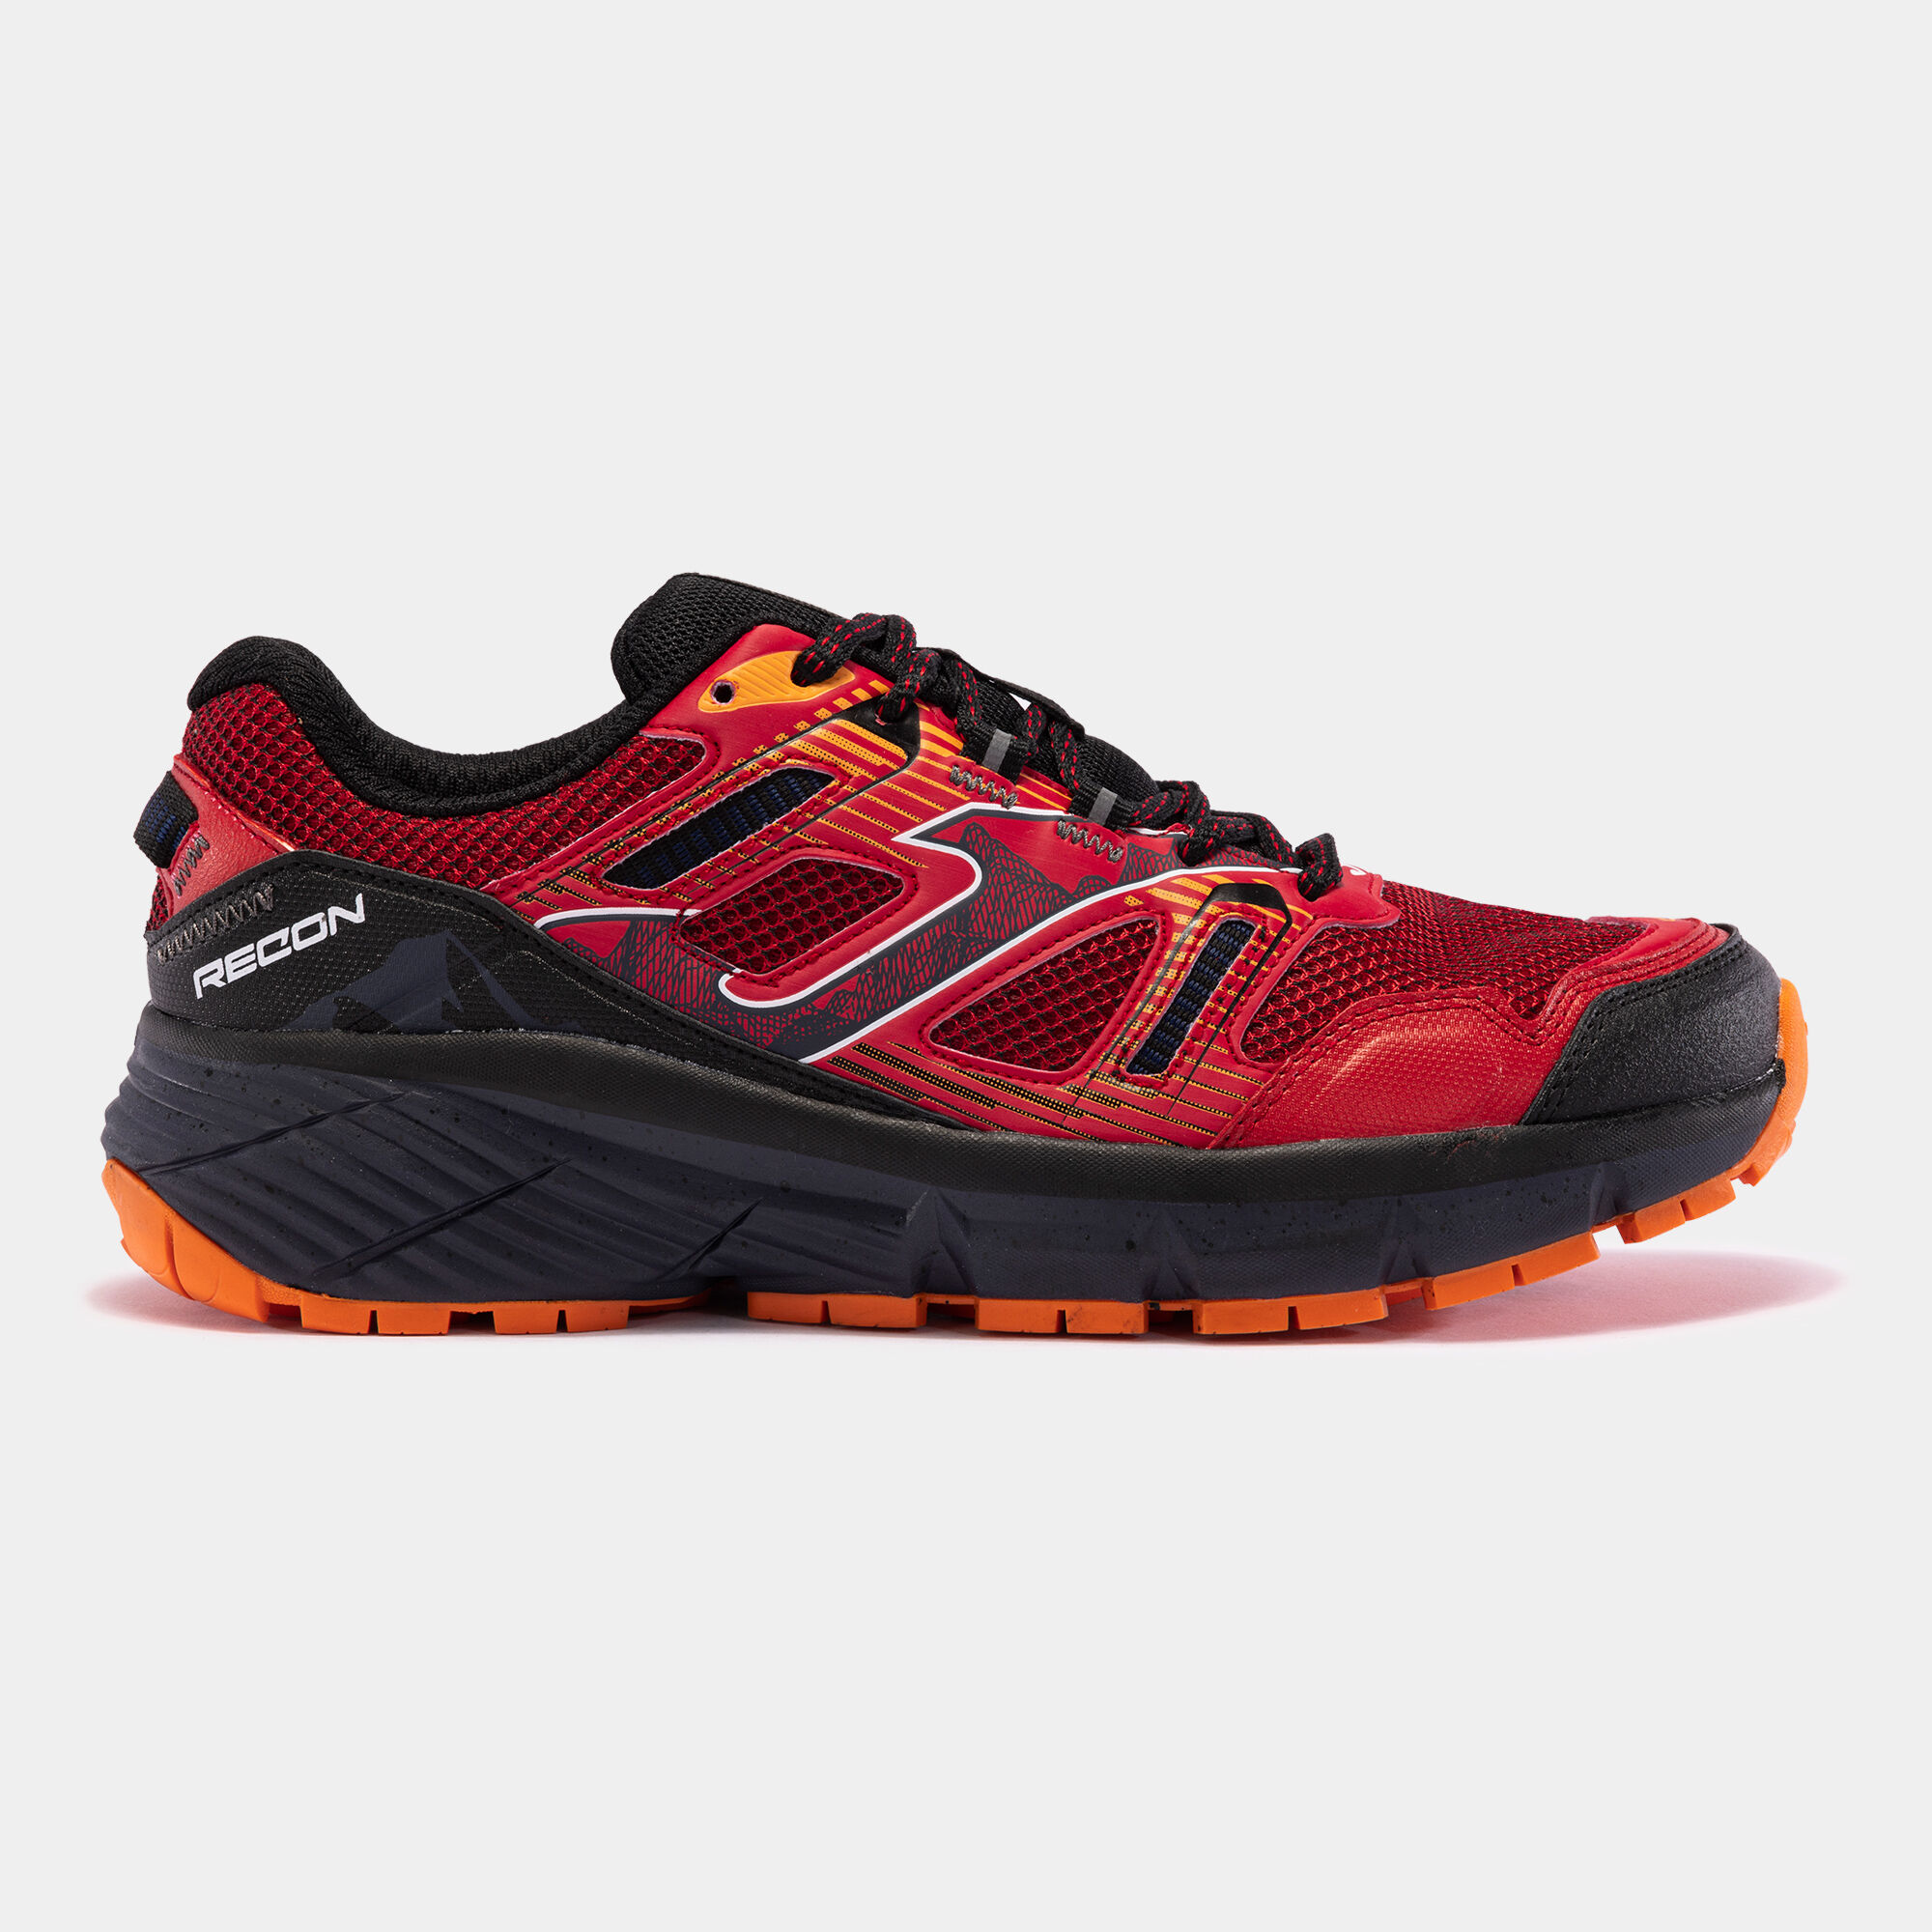 Trail-running shoes Recon 24 man red